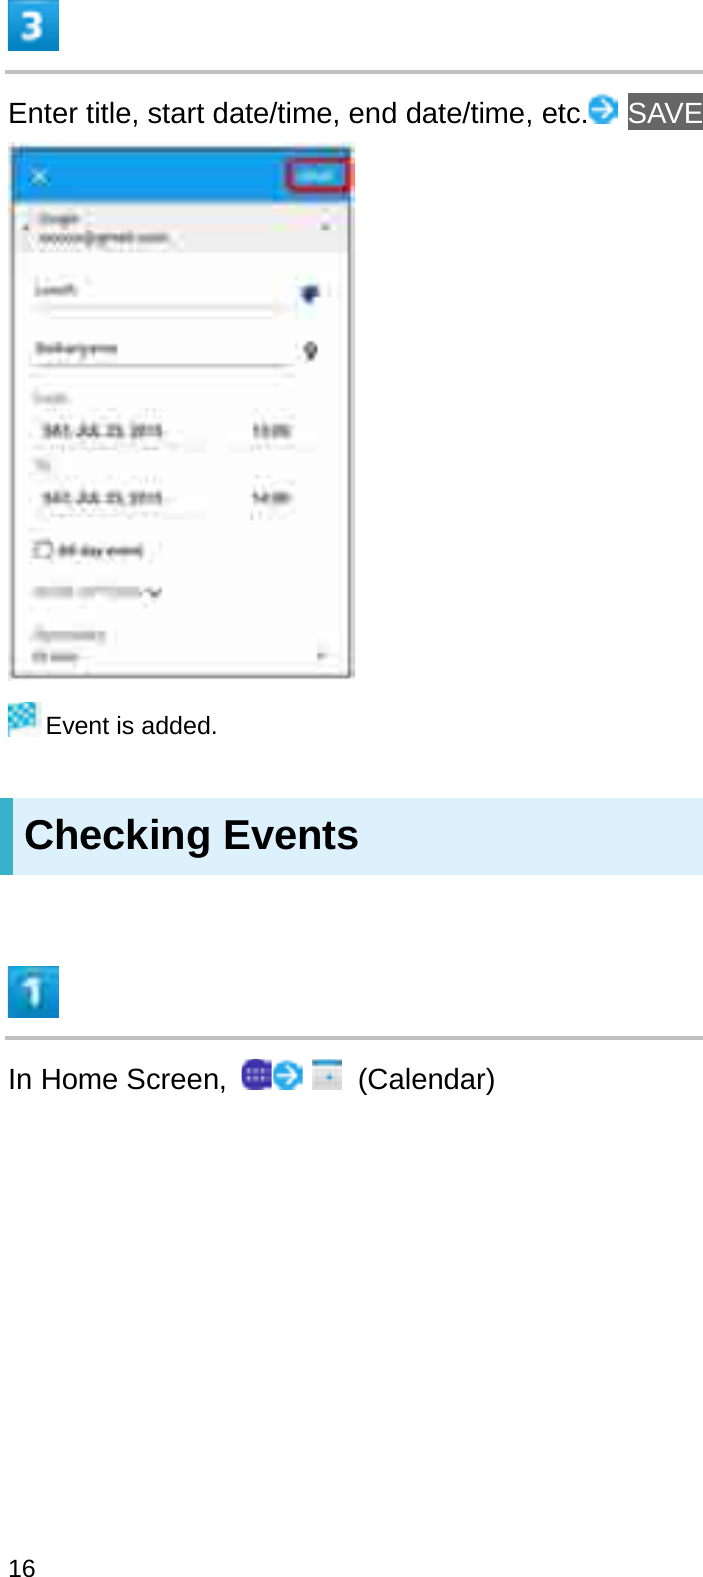 Enter title, start date/time, end date/time, etc. SAVEEvent is added.Checking EventsIn Home Screen,  (Calendar)16